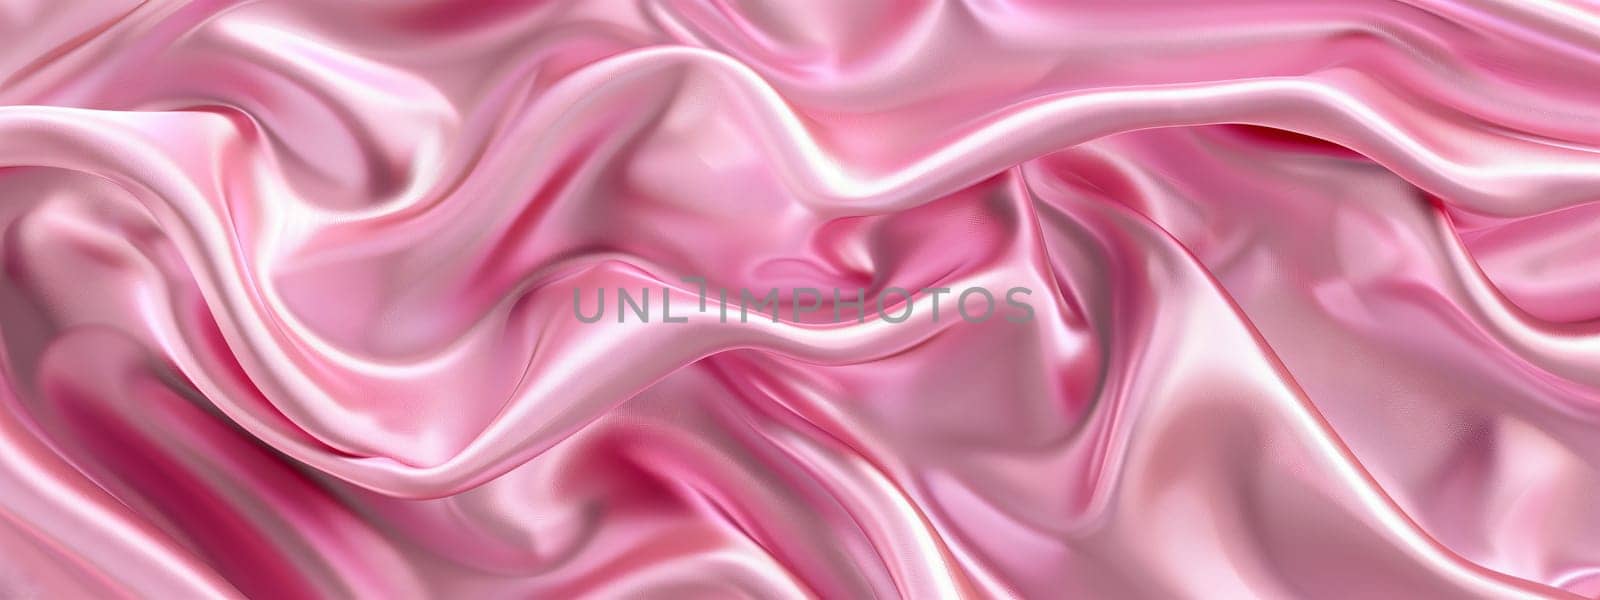 Closeup of liquid magenta satin with wave pattern by richwolf